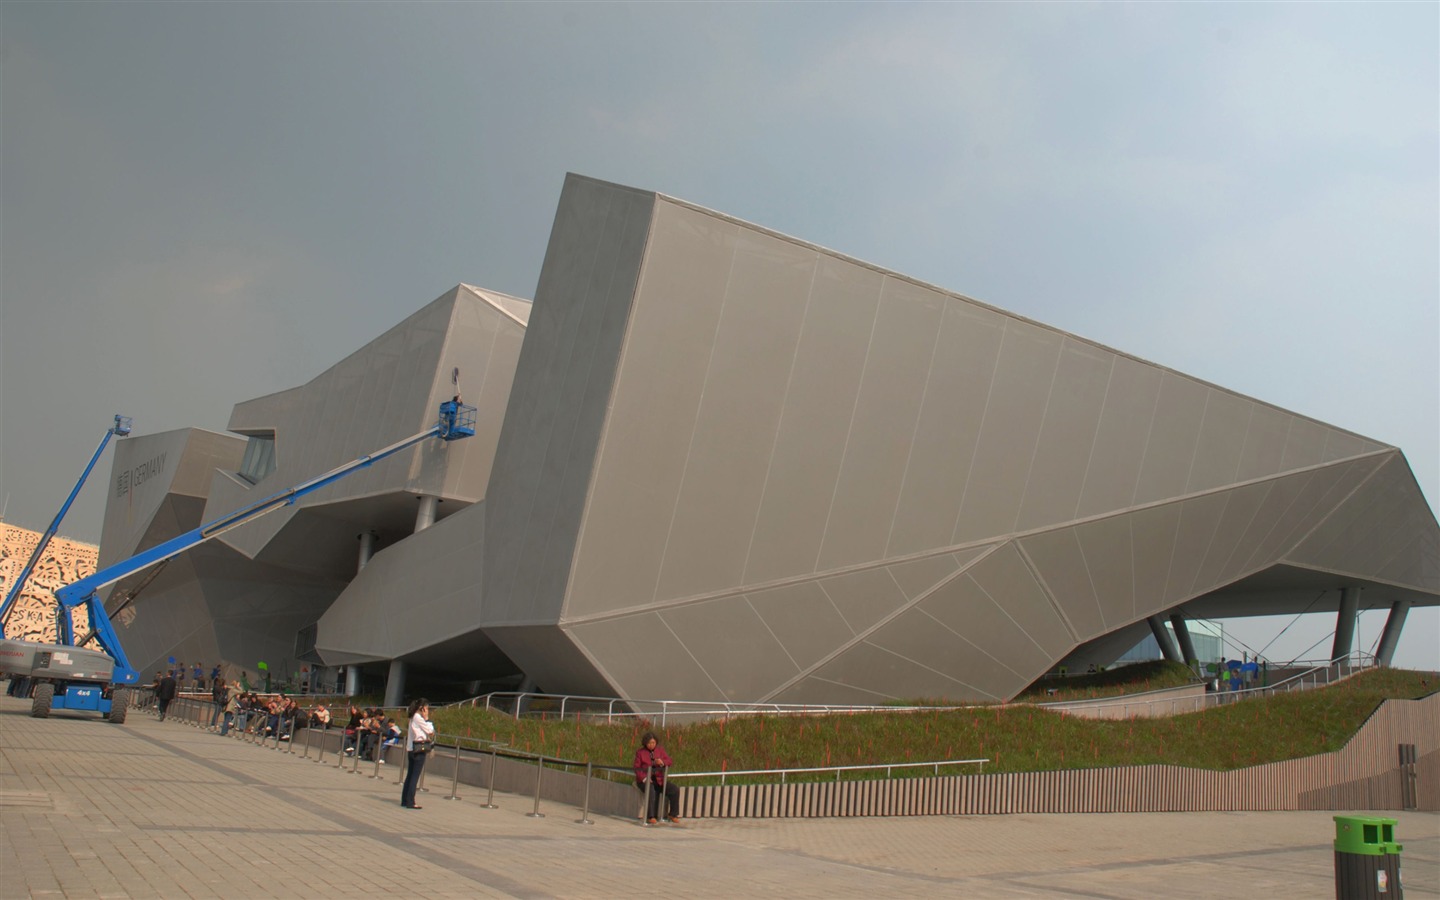 Commissioning of the 2010 Shanghai World Expo (studious works) #21 - 1440x900